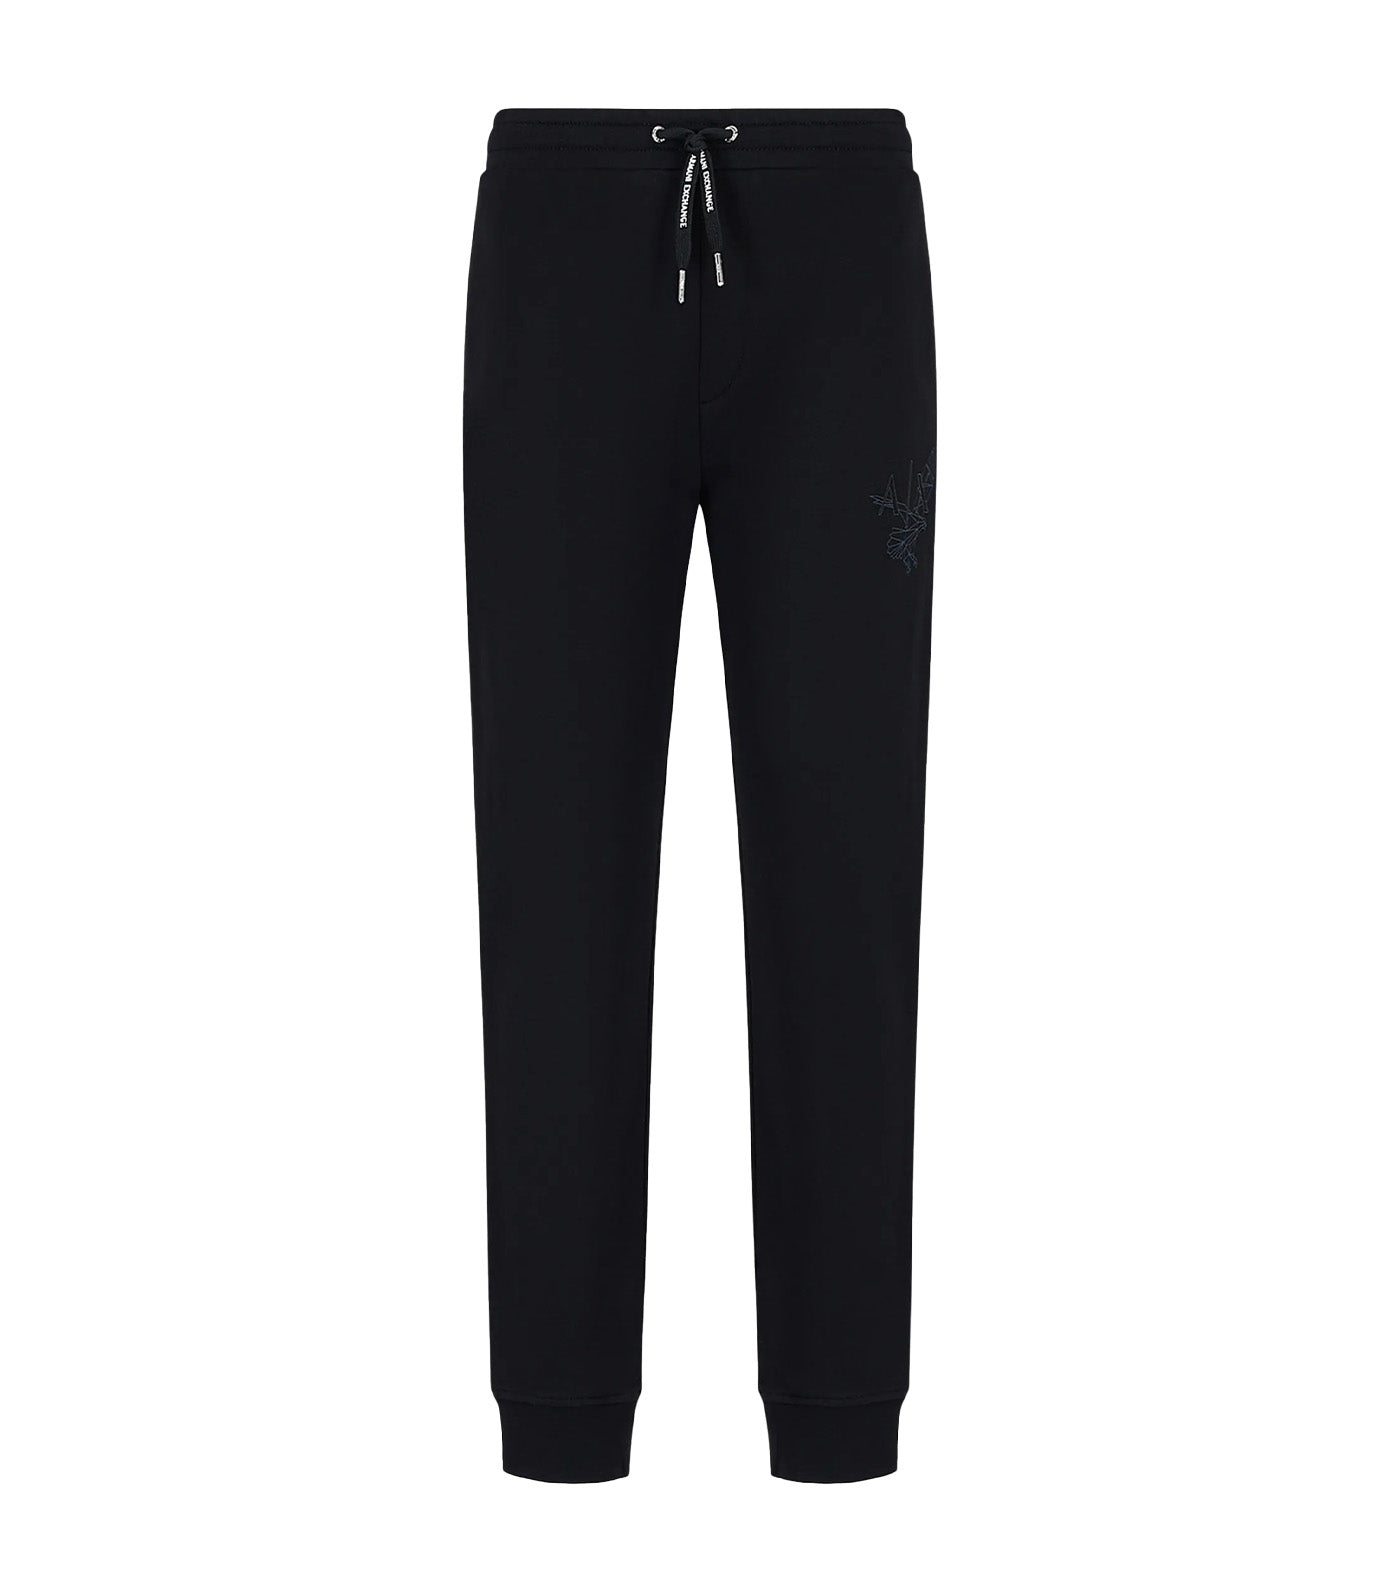 French terry cotton jogger sweatpants